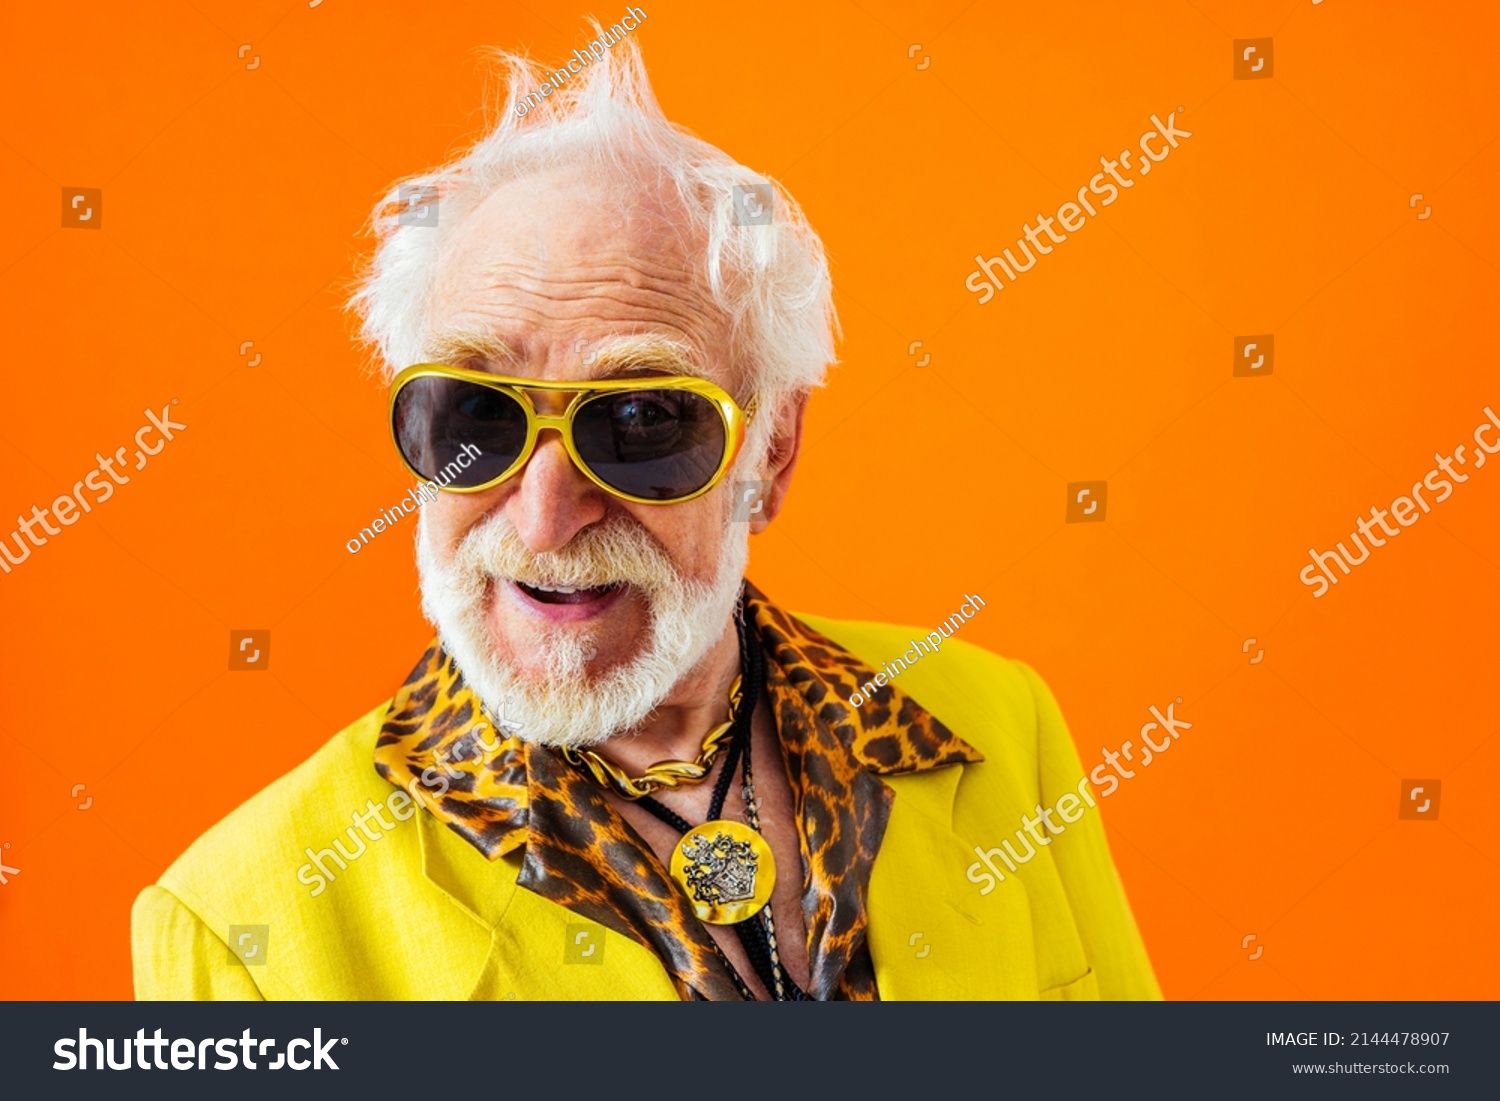 Cool senior man with fashionable clothing style portrait on colored background - Funny old male pensioner with eccentric style having fun #2144478907